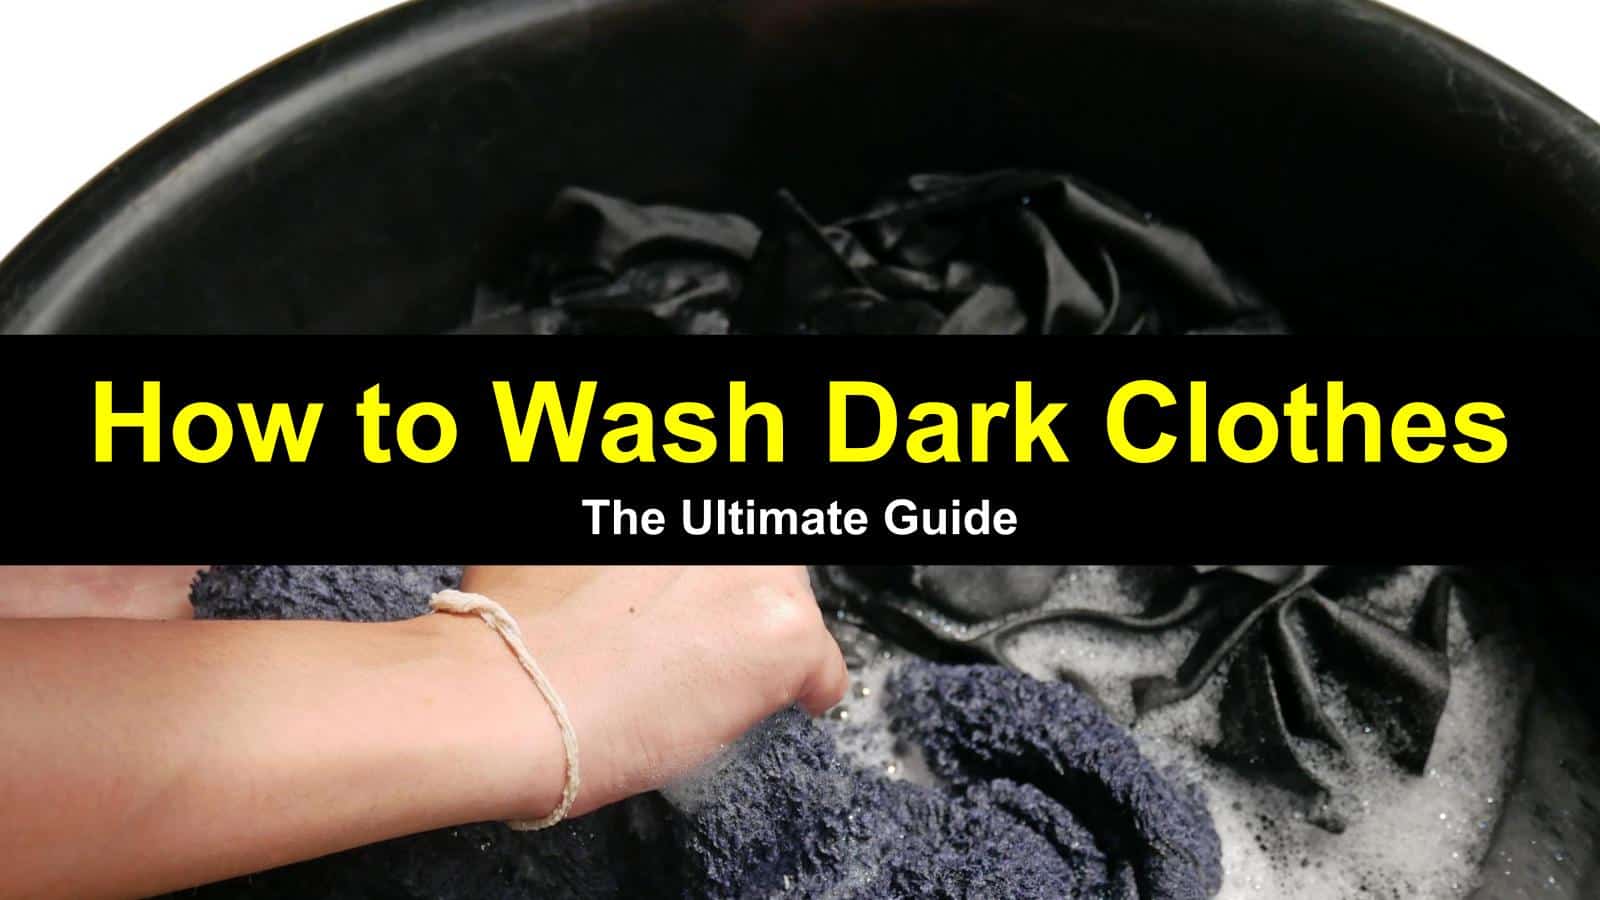 how to wash dark clothes titleimg 1